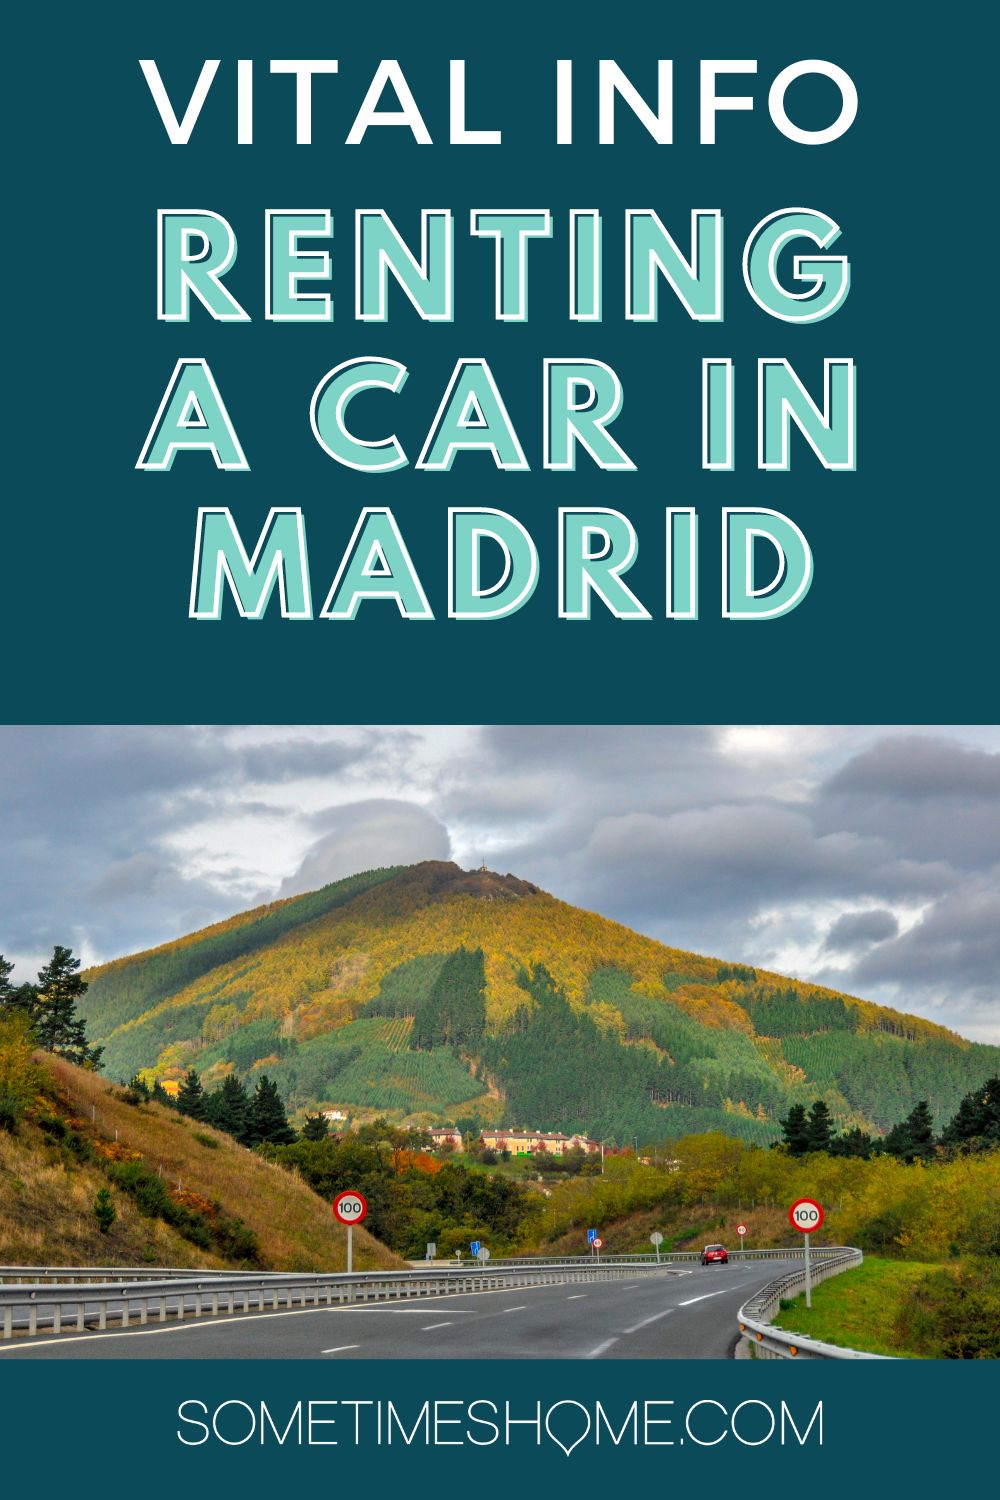 Vital info renting a car in Madrid with a picture of the countryside in Spain.